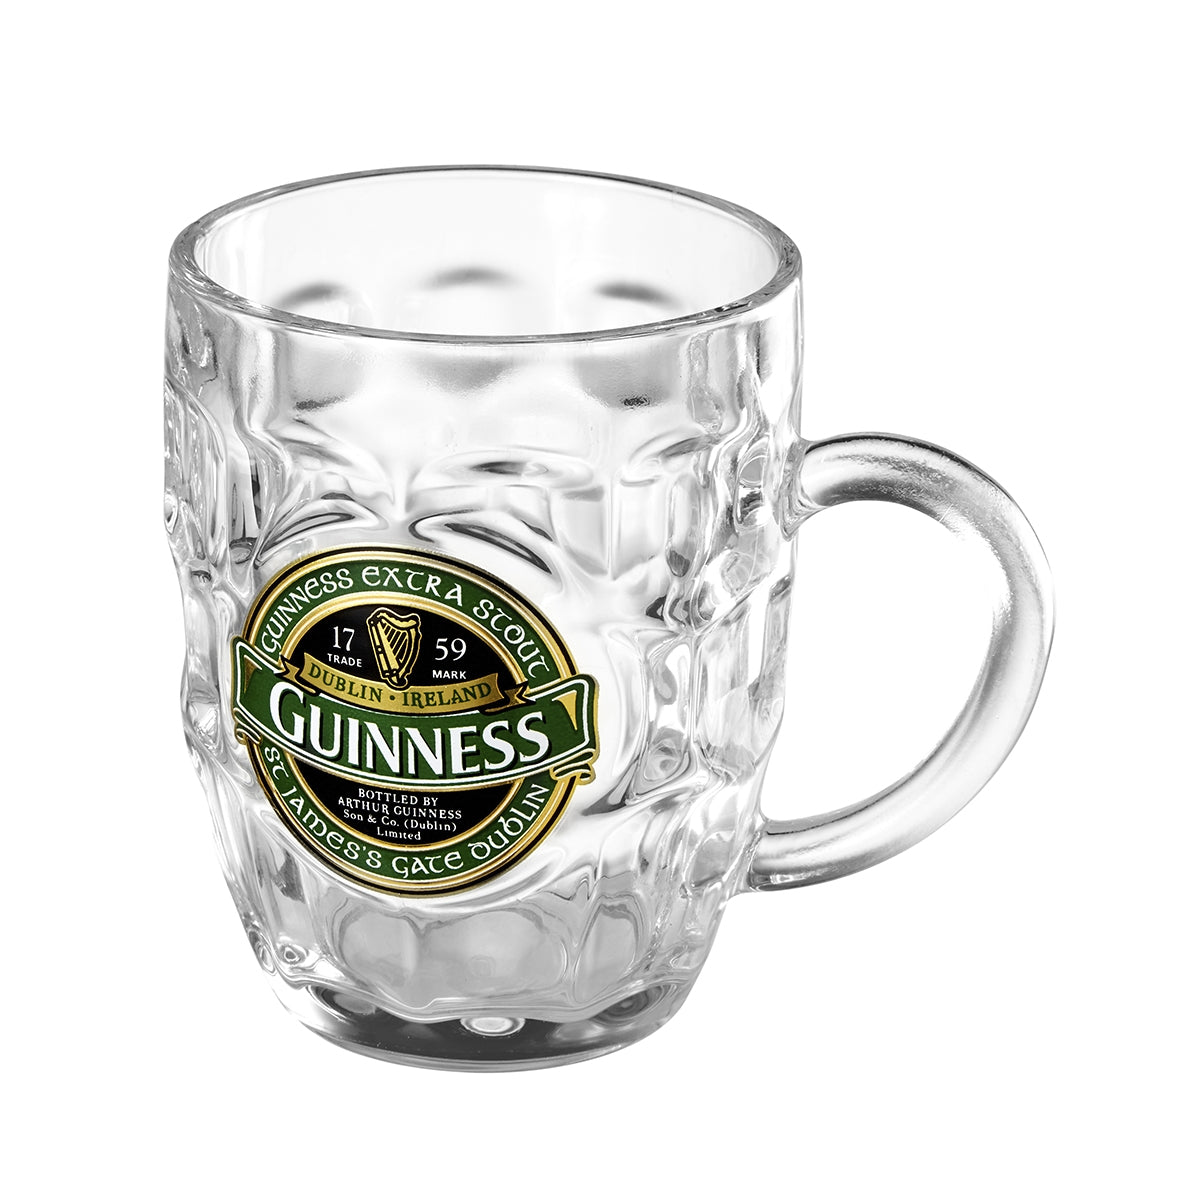 A Guinness Ireland - Dimpled Tankard on a white background.